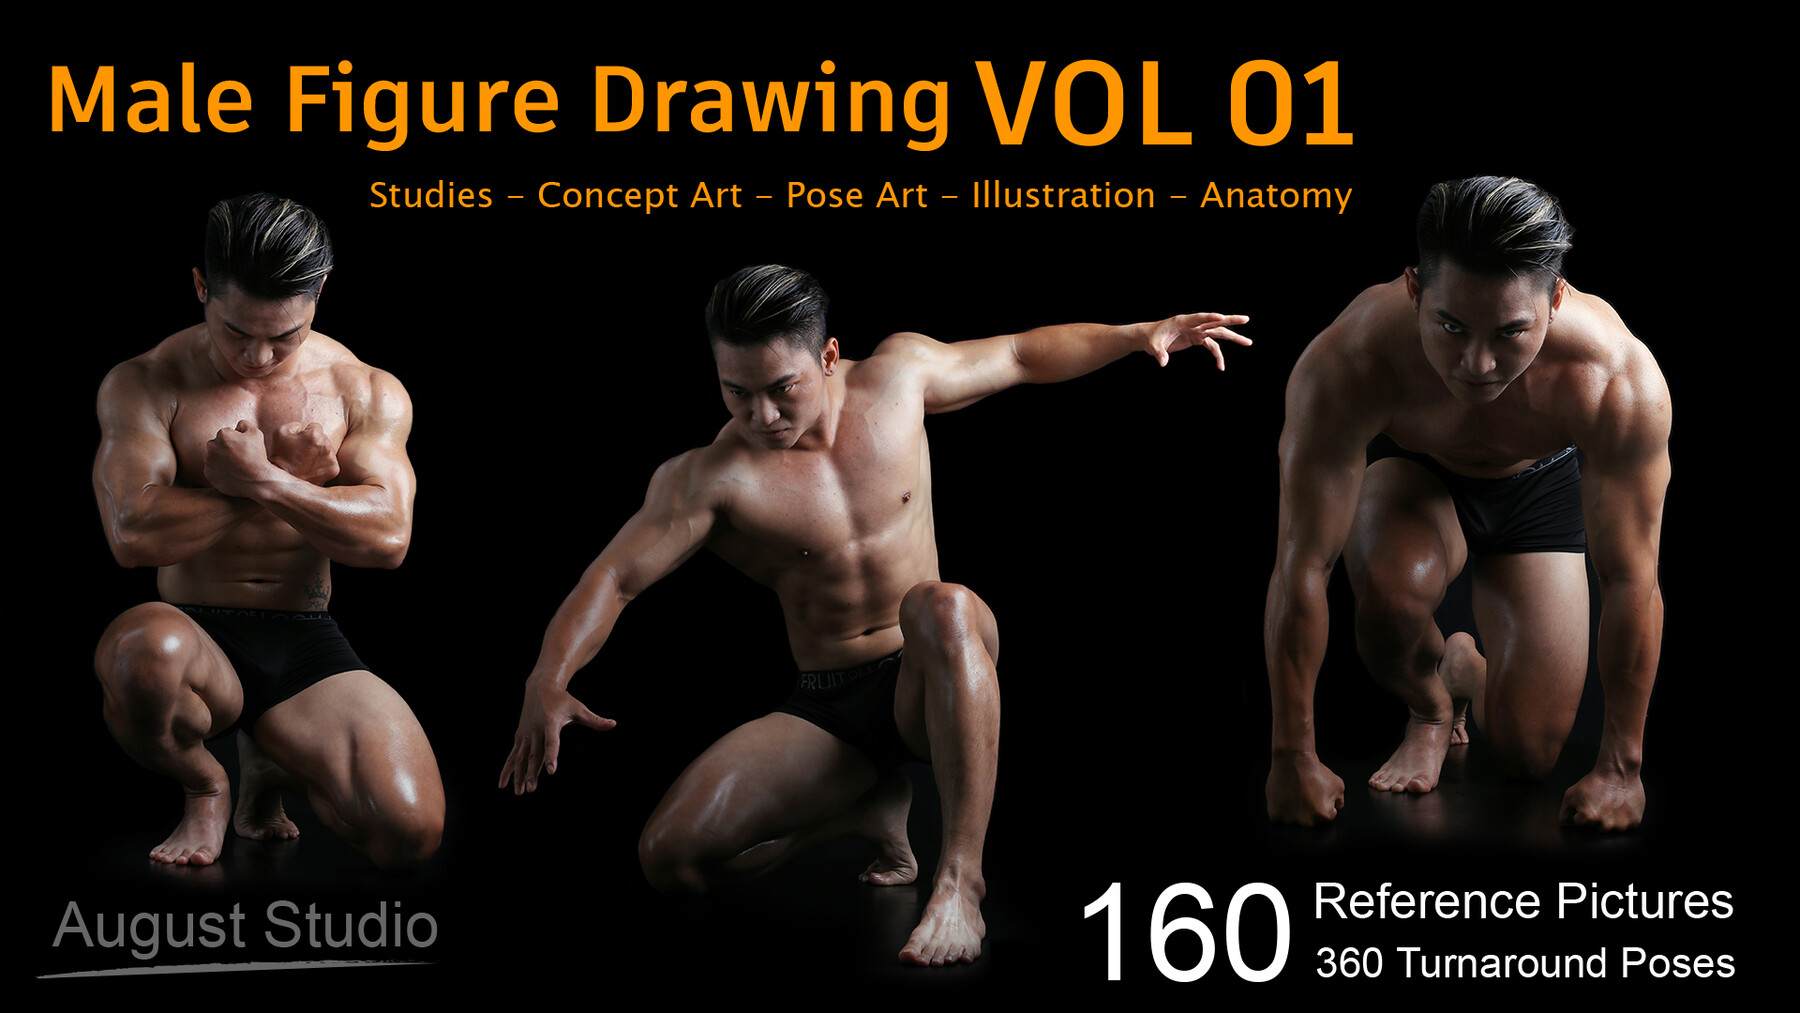 Learn Figurative Drawing and Why It Matters | Skillshare Blog